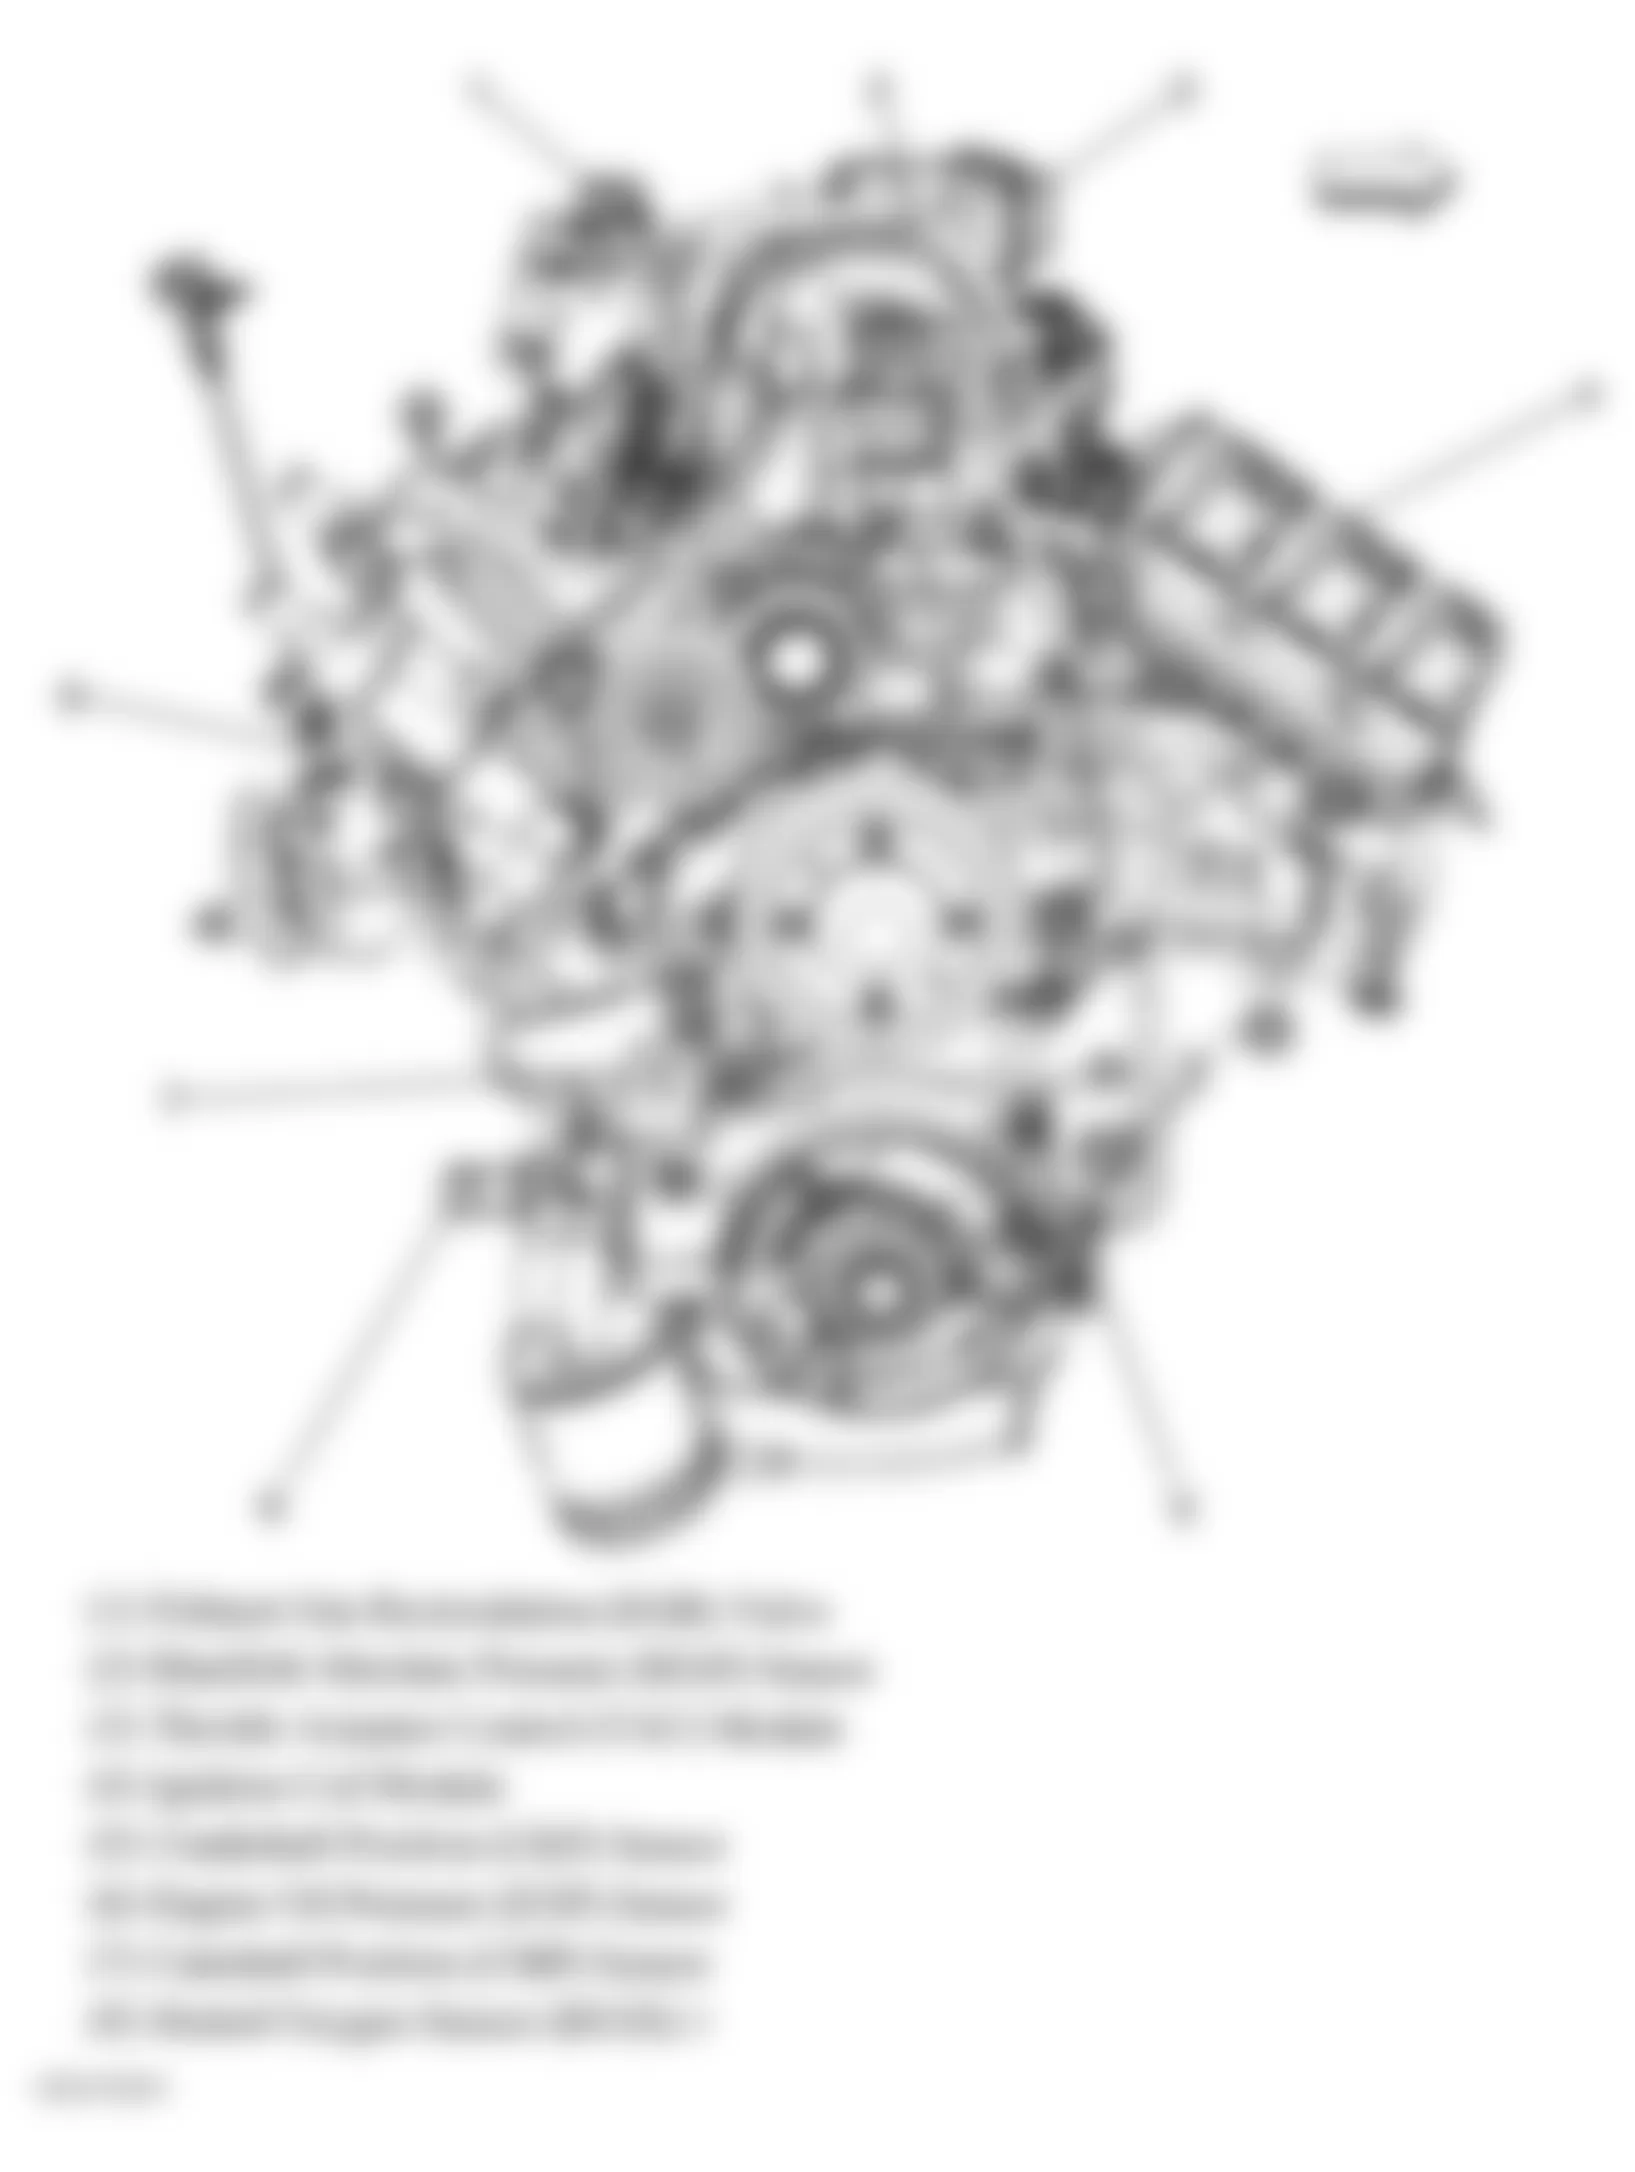 Buick Lucerne CXS 2007 - Component Locations -  Front Of Engine (3.8L)